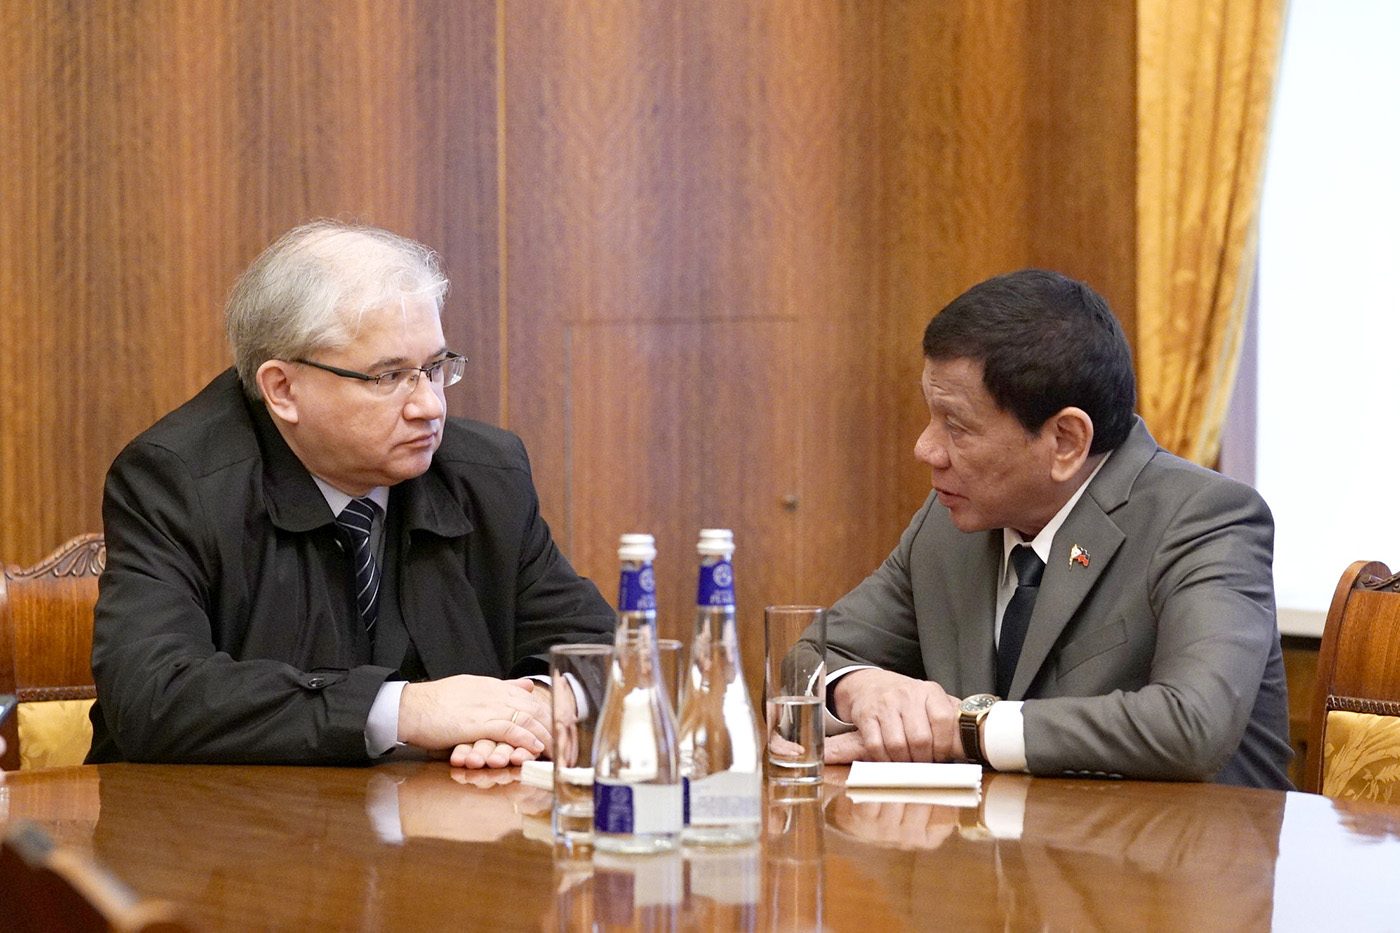 Team from Russian energy firm visited Manila for oil exploration talks – envoy